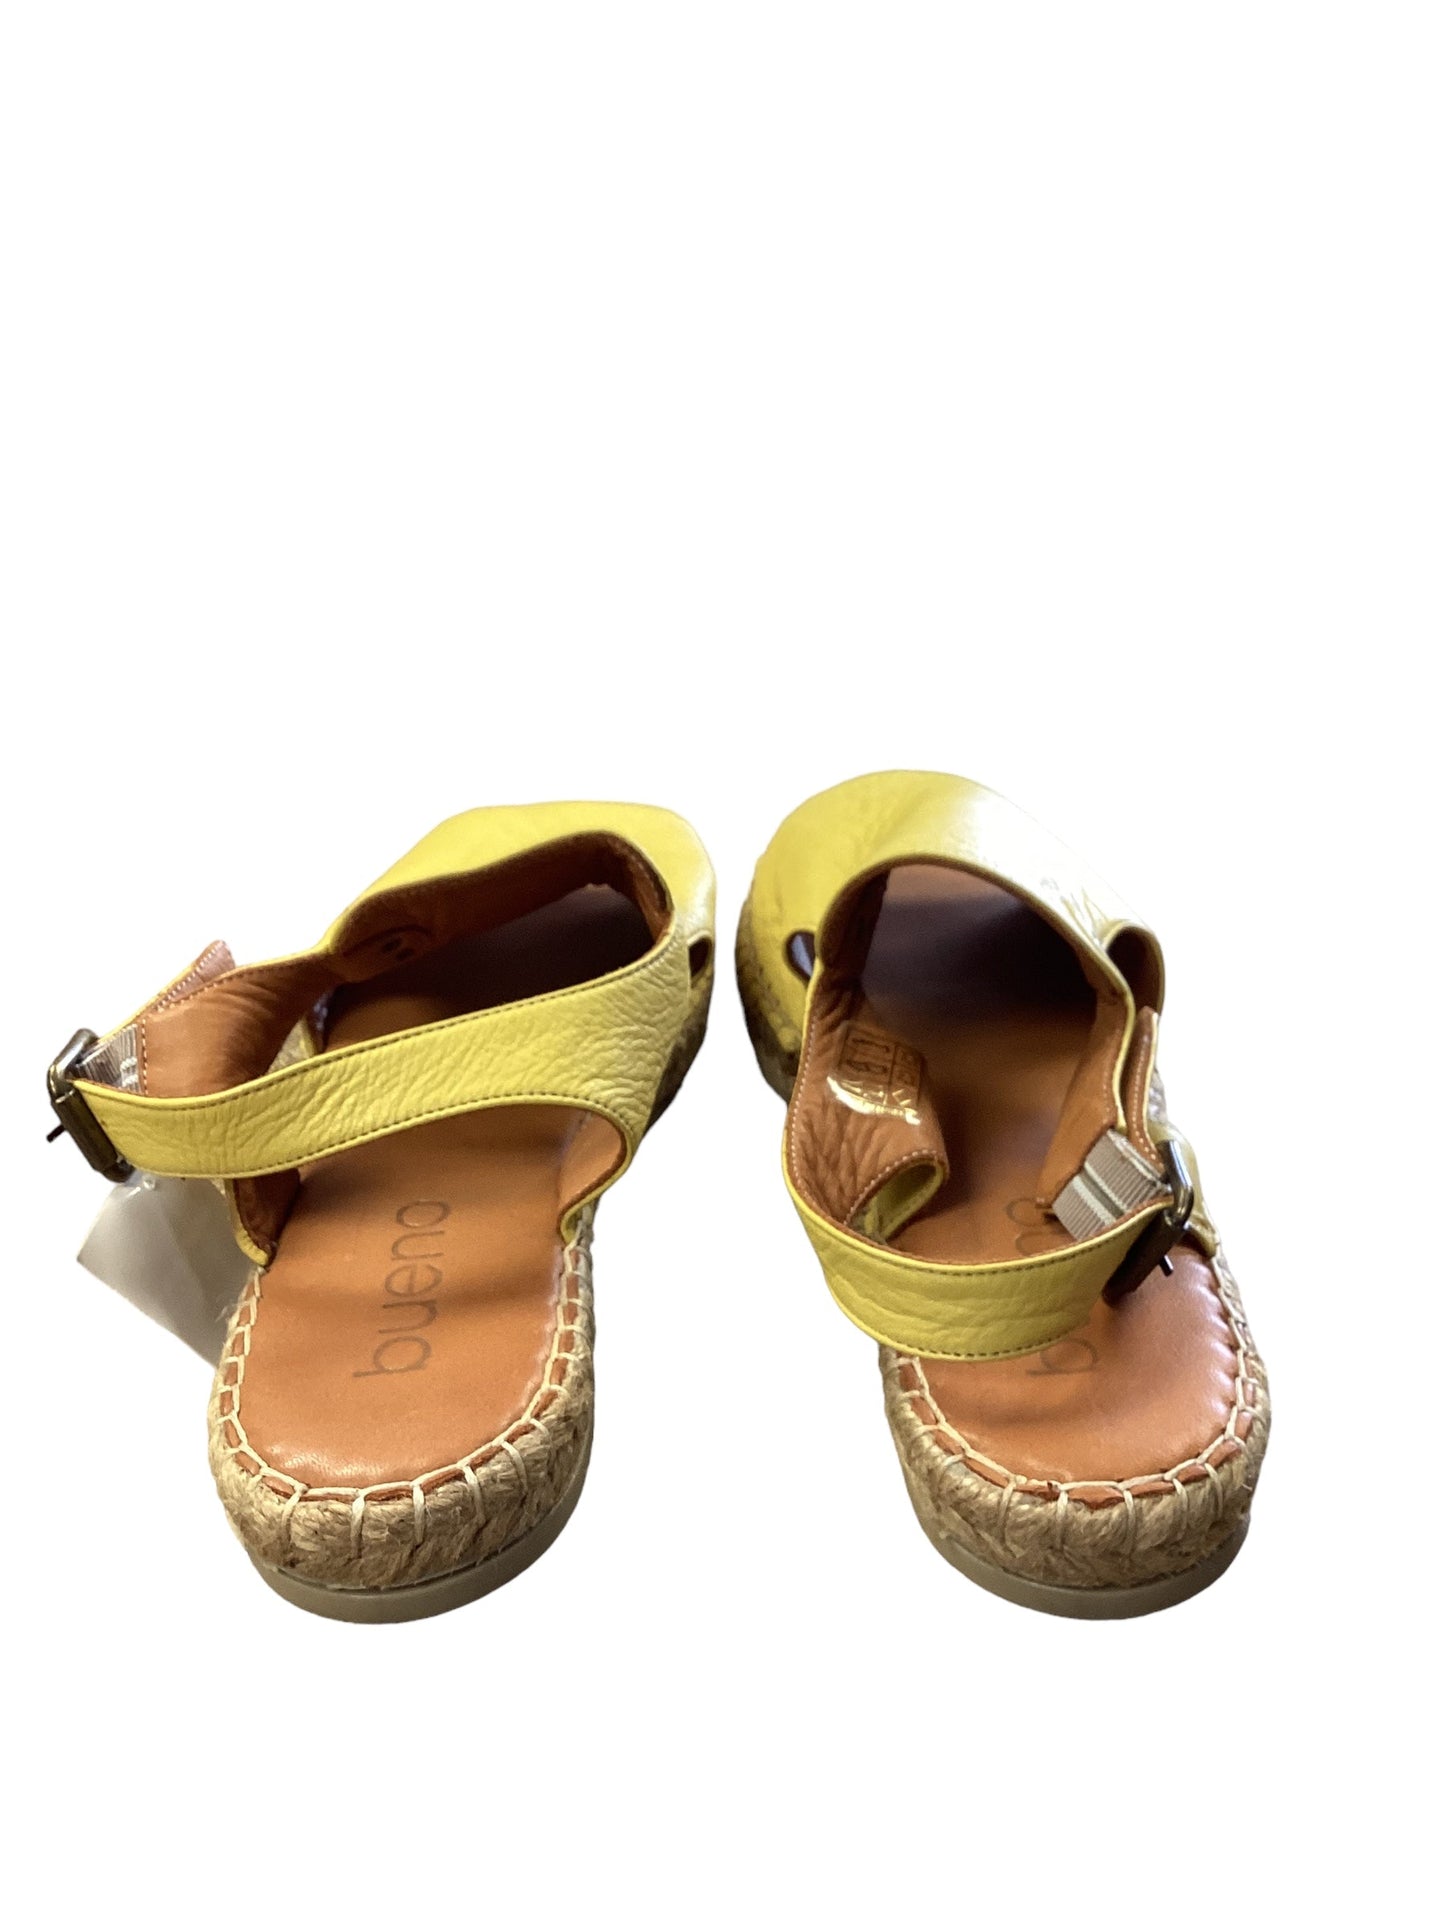 Yellow Sandals Flats Bueno, Size 9.5